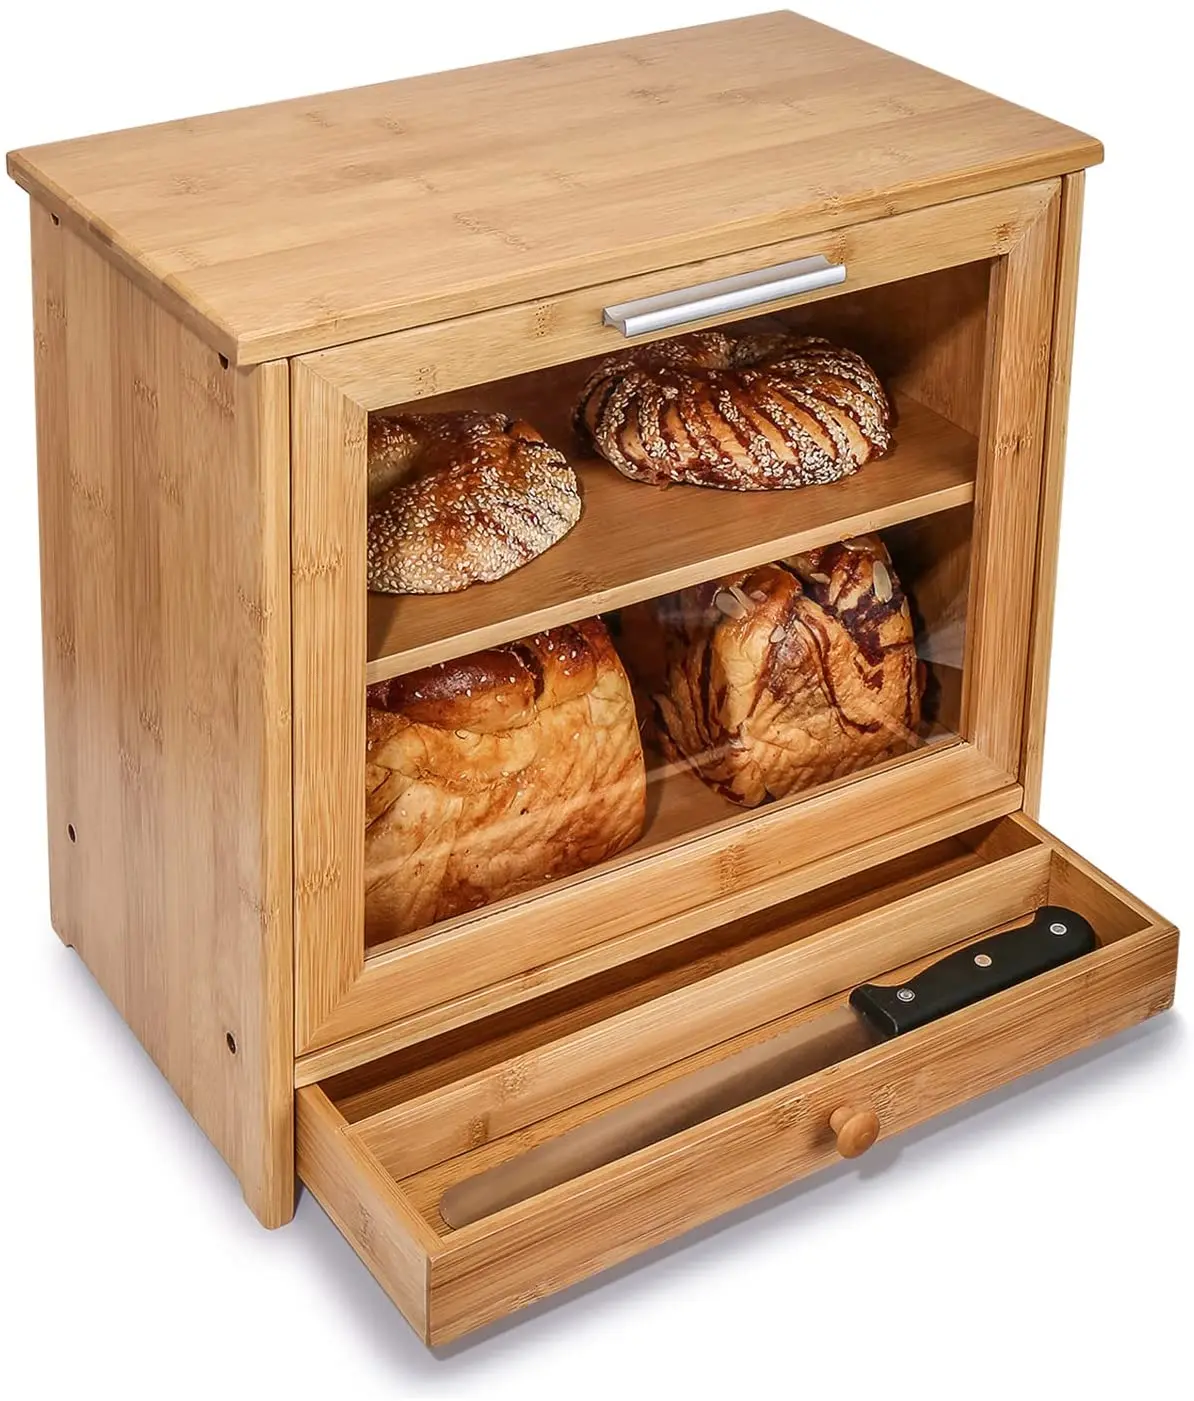 

Large Bamboo Bread Box For Kitchen CountertopCome With Clear Front Window And Tool Drawer2 Layer Bread Storage Bin With Adjust